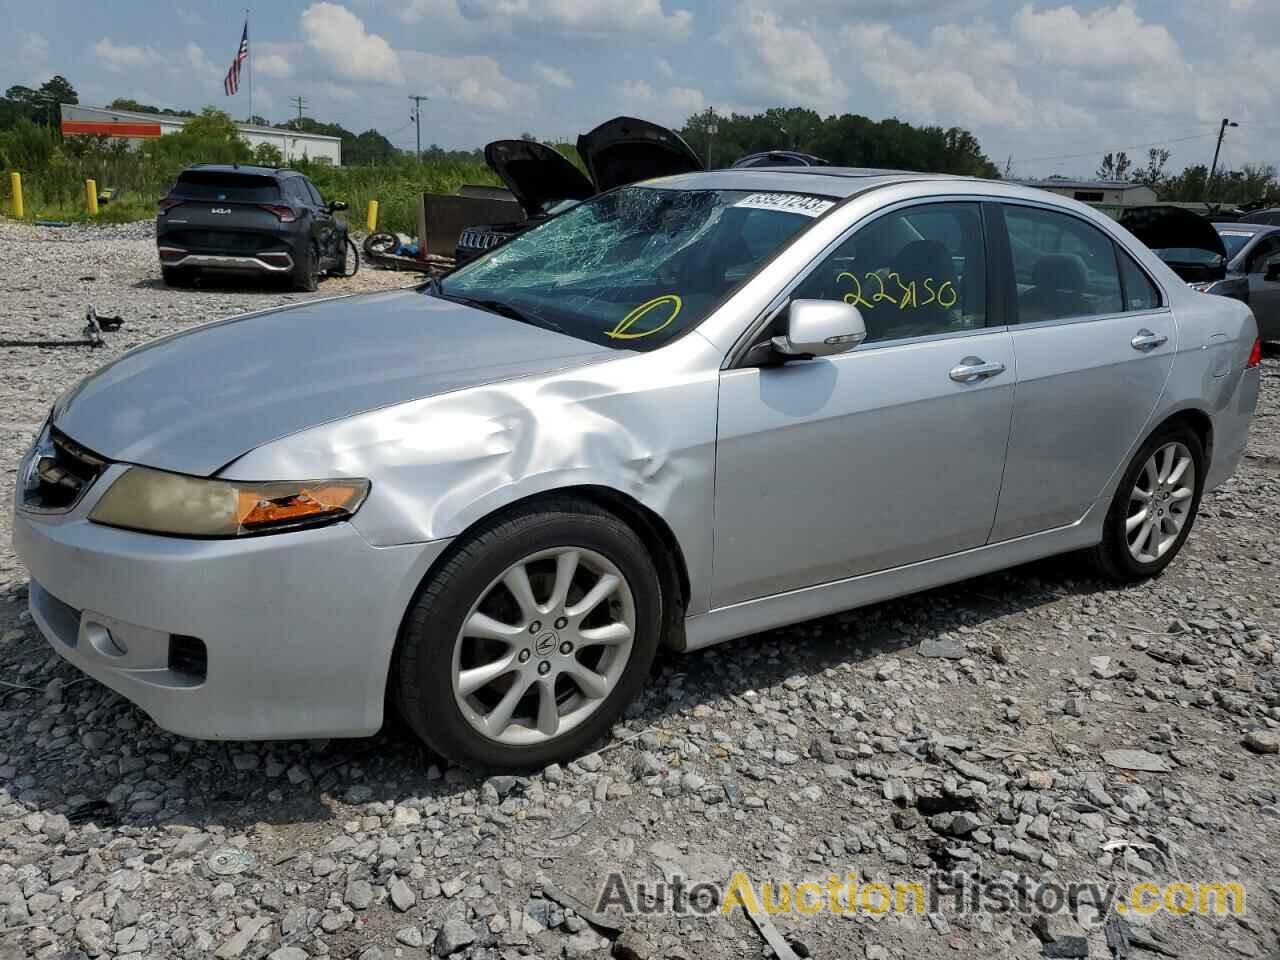 2008 ACURA TSX, JH4CL96818C000877